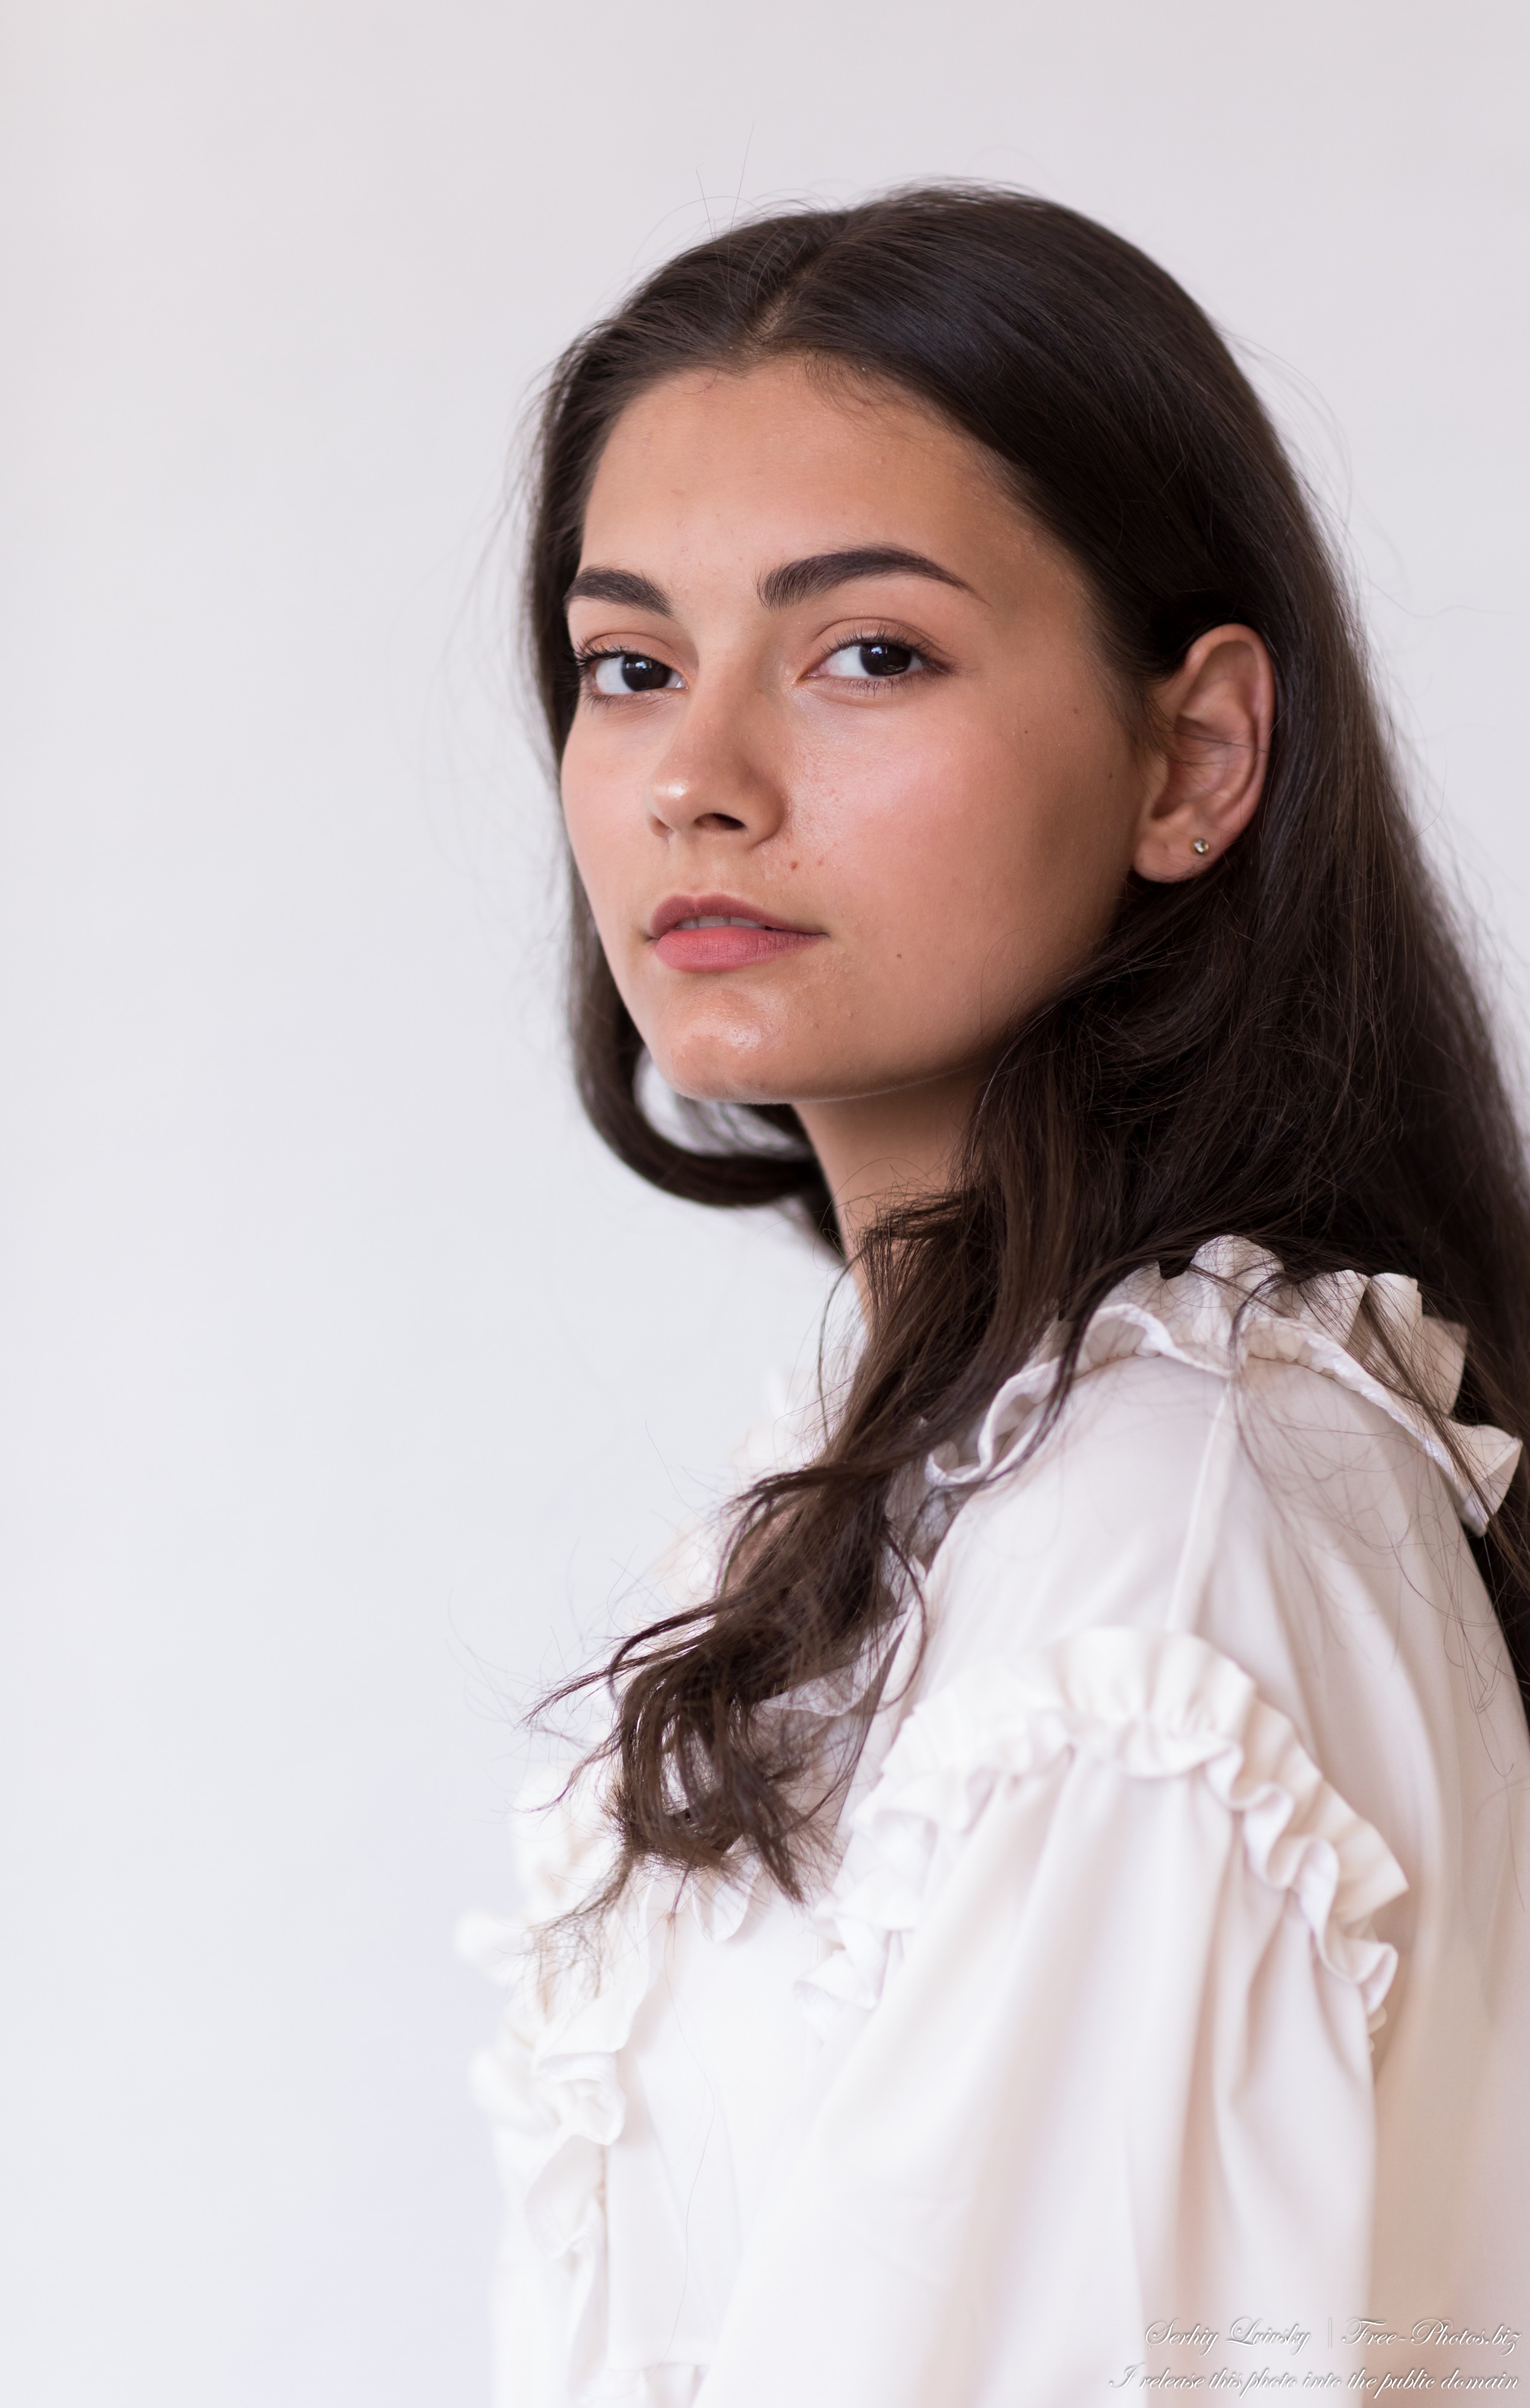 Marichka - a 16-year-old Catholic girl photographed by Serhiy Lvivsky in September 2020, picture 17